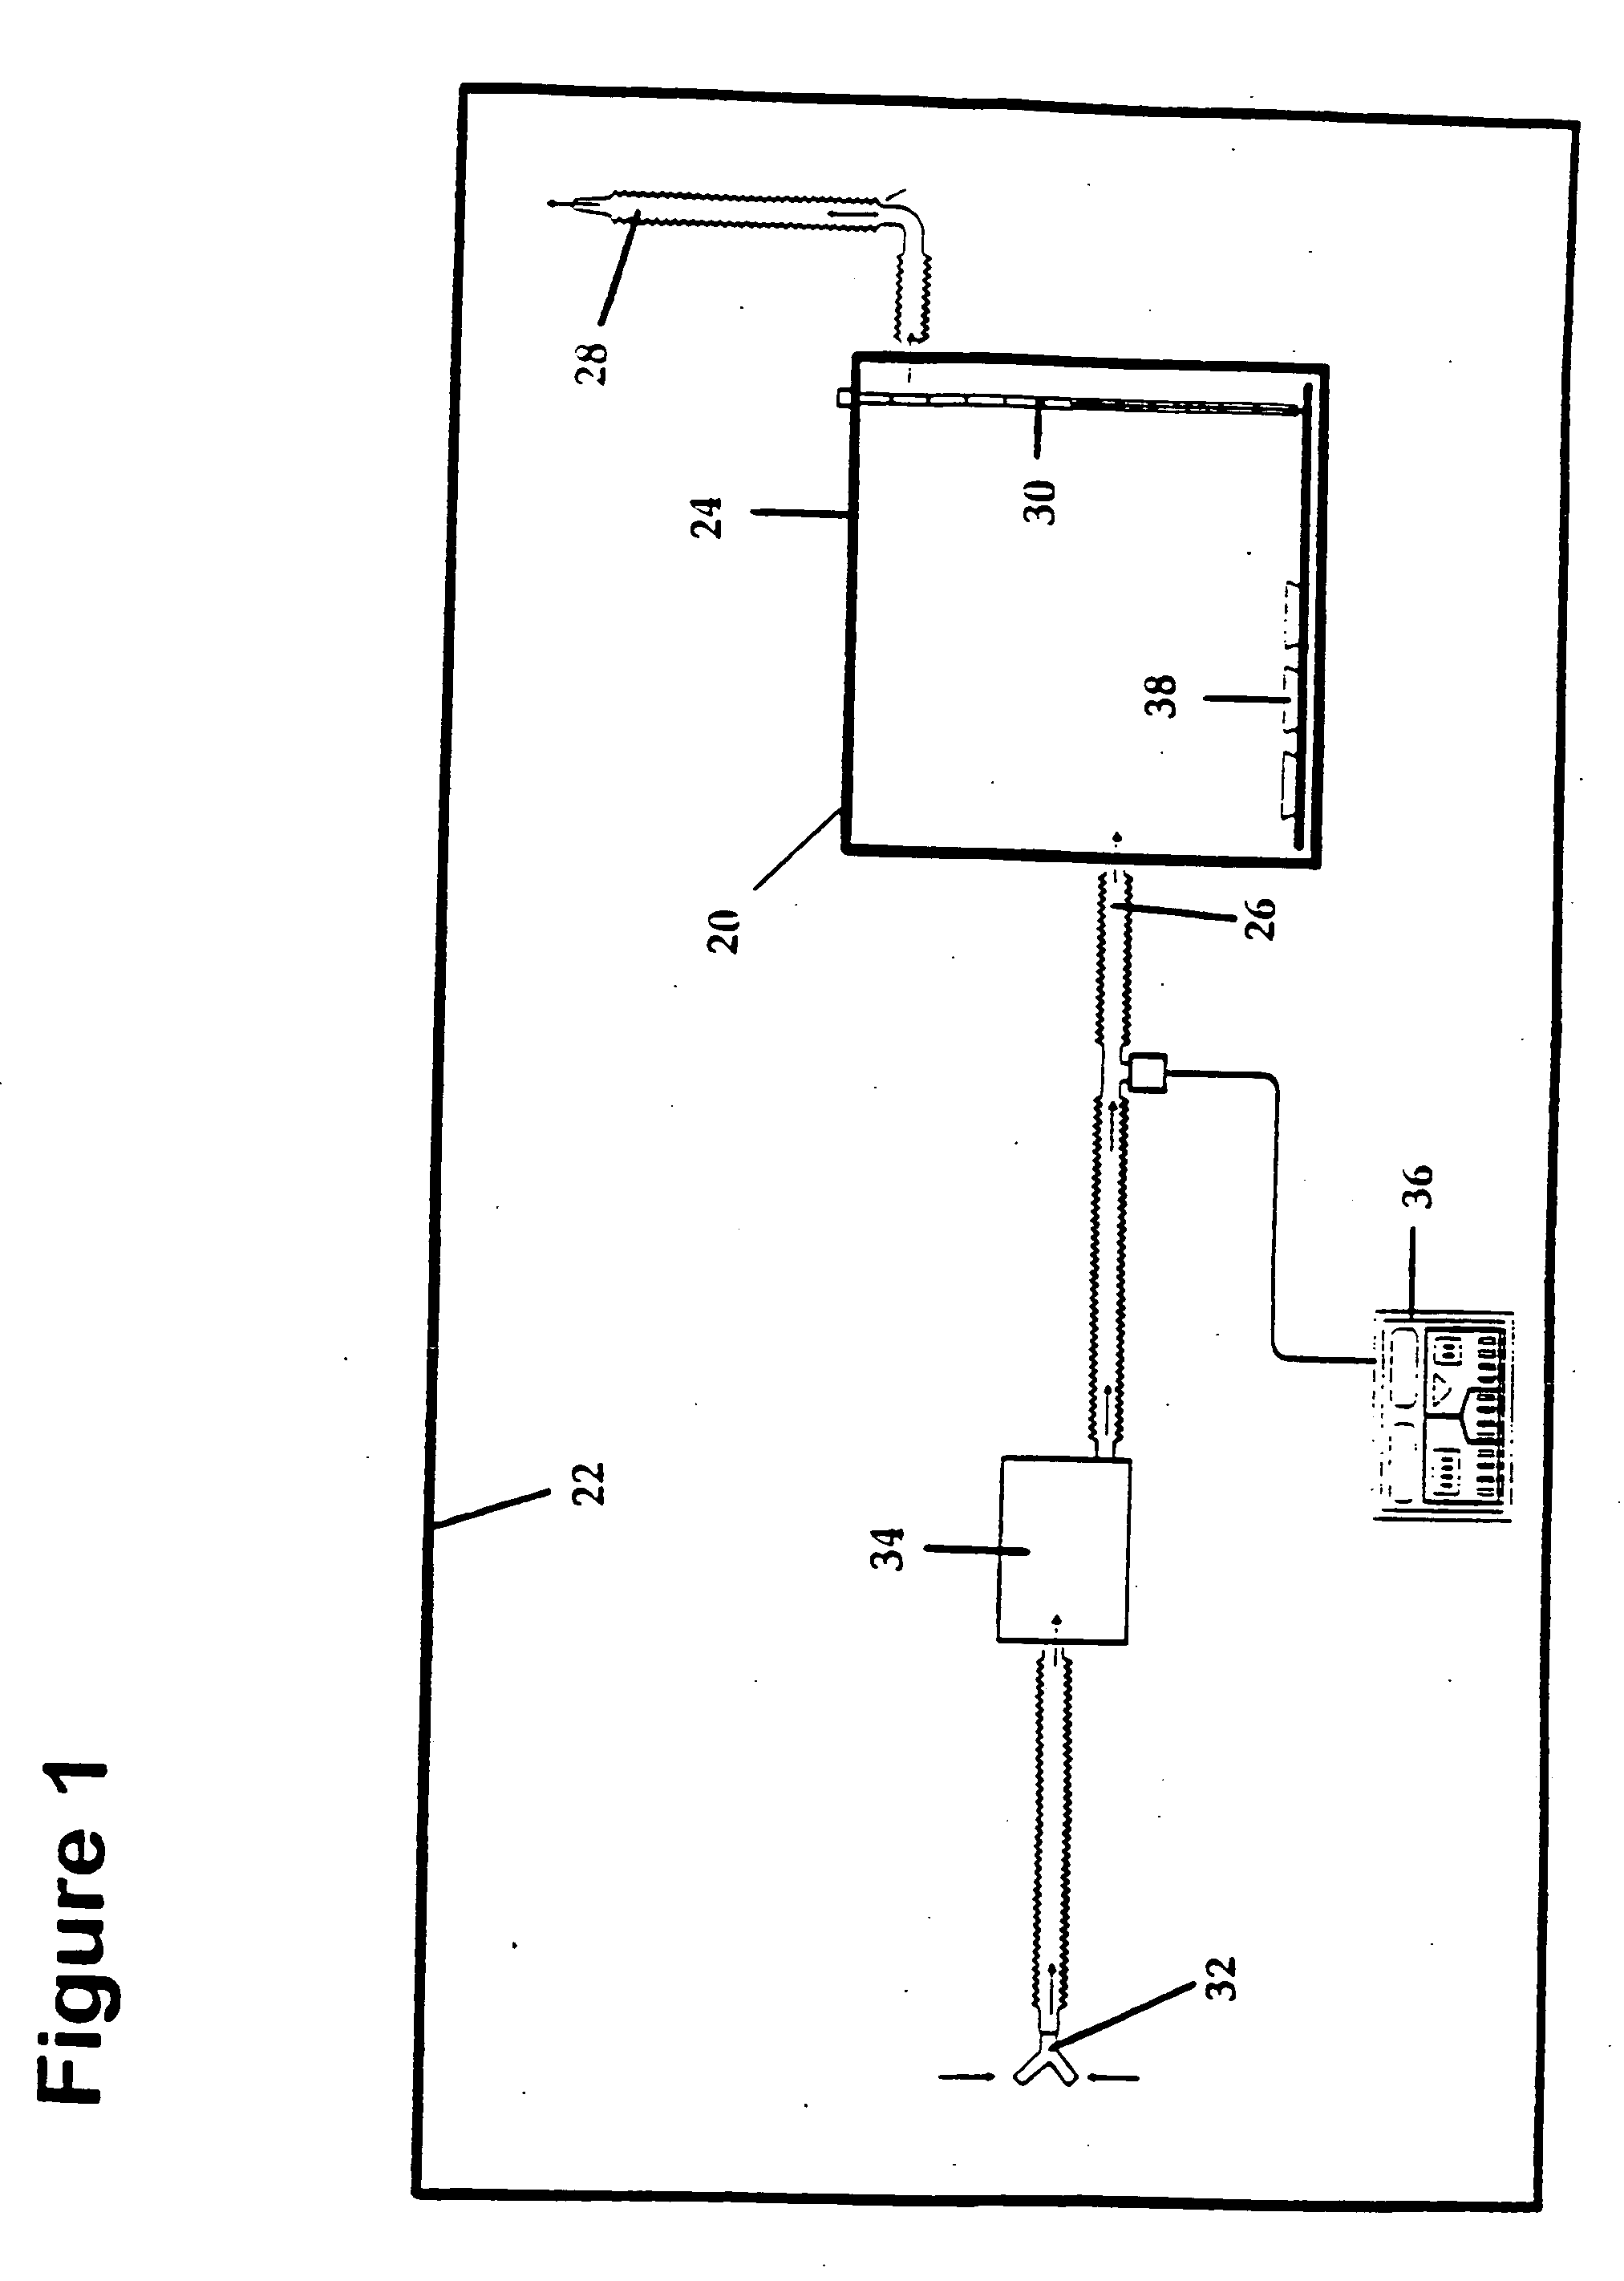 Method and apparatus for treatment of respiratory infections by nitric oxide inhalation